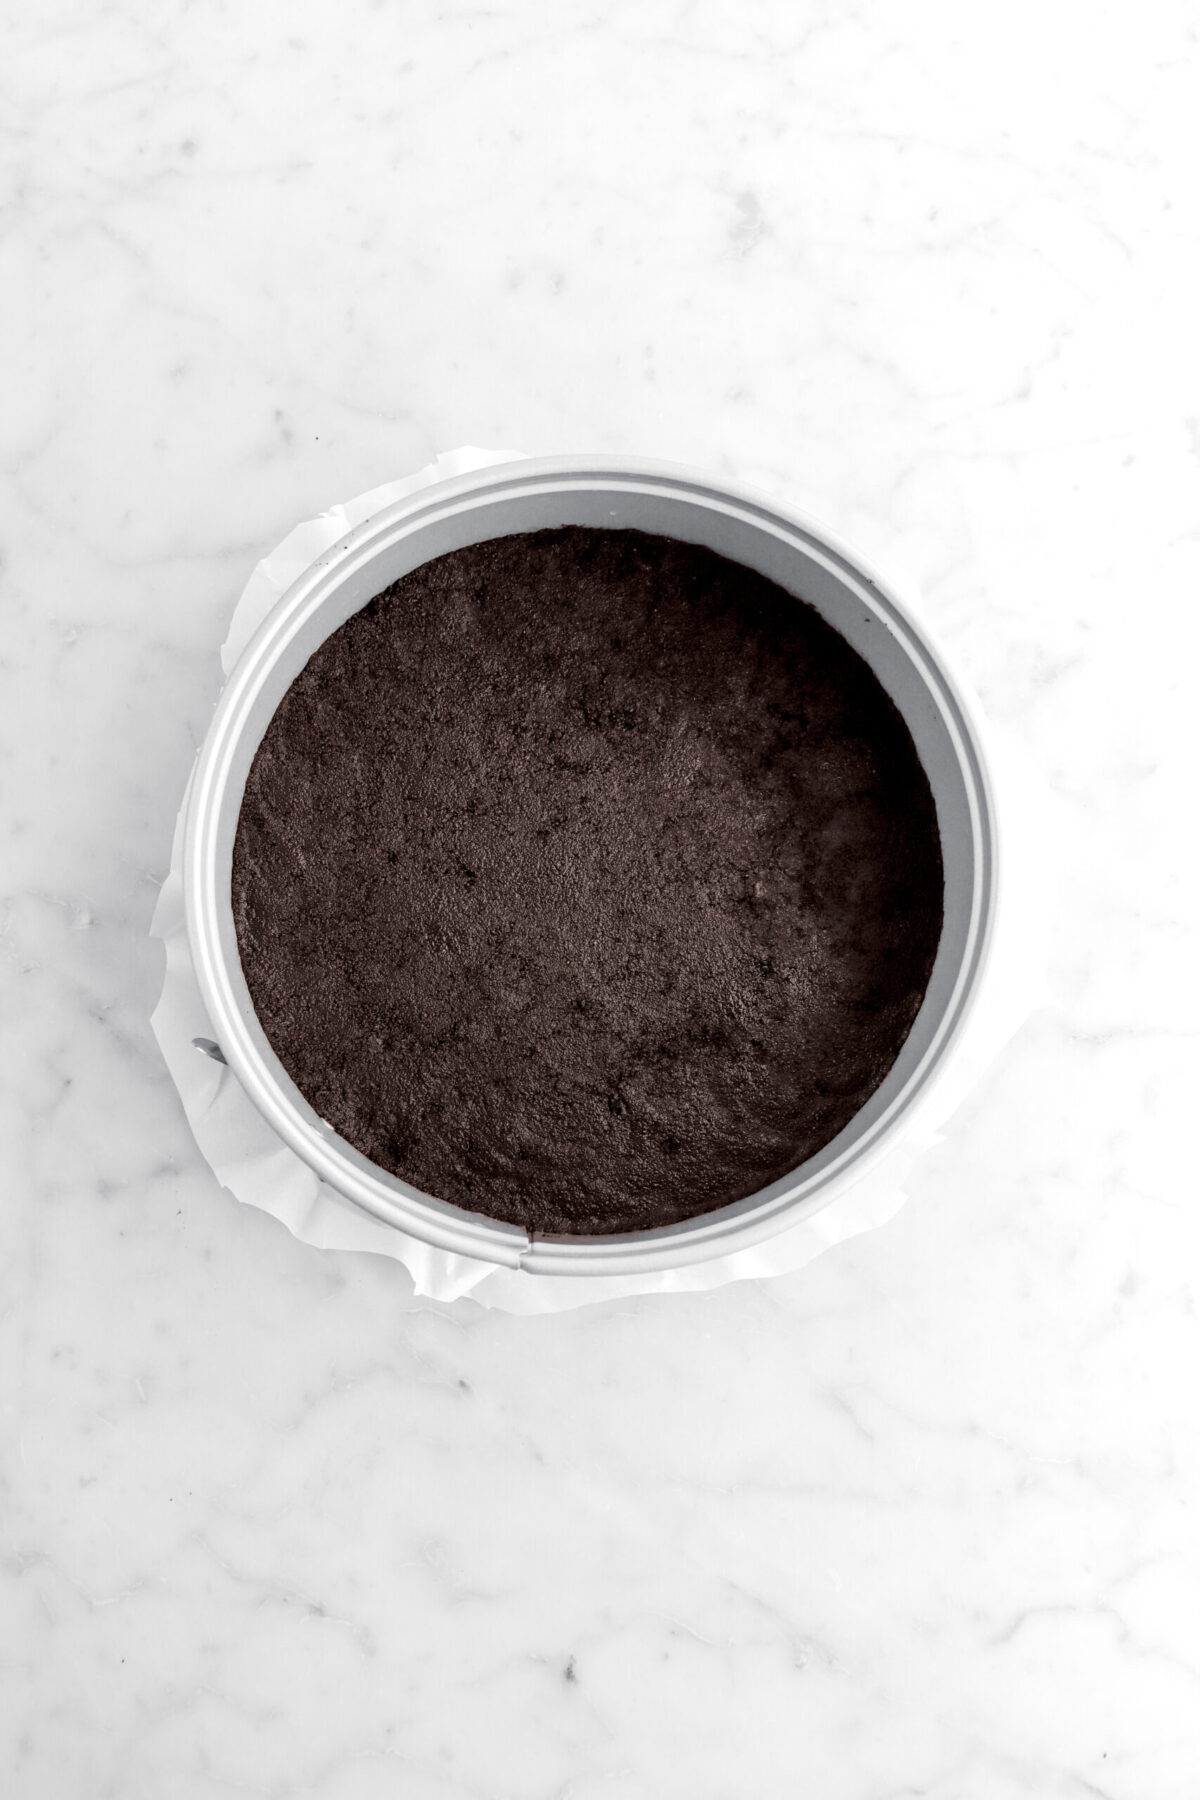 packed oreo crust in spring form pan.